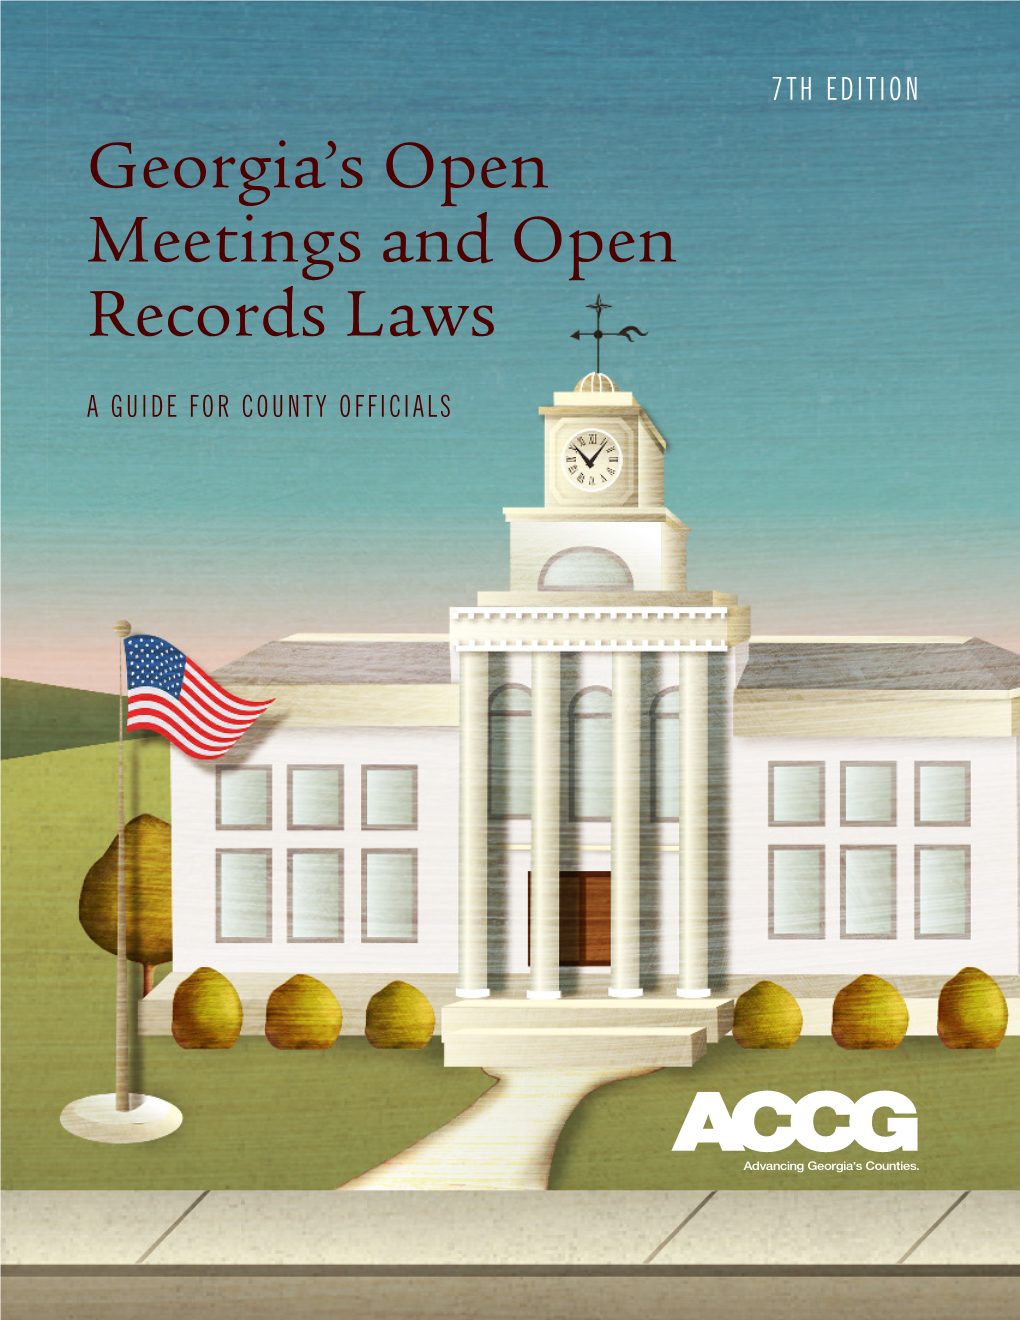 Georgia's Open Meetings and Open Records Laws